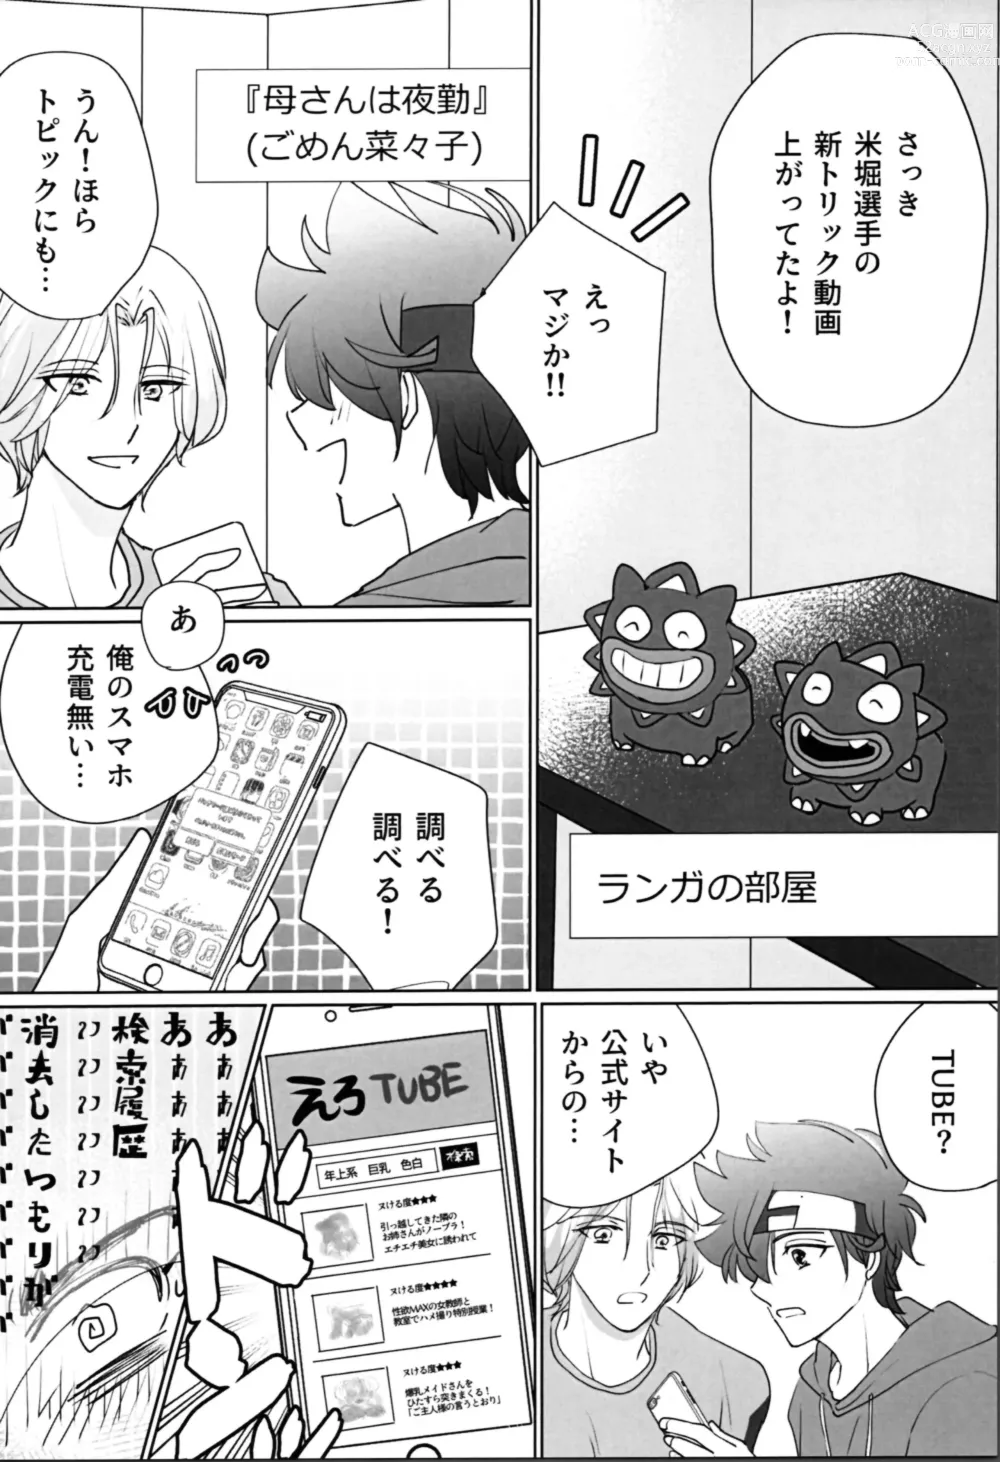 Page 5 of doujinshi What you like about me.